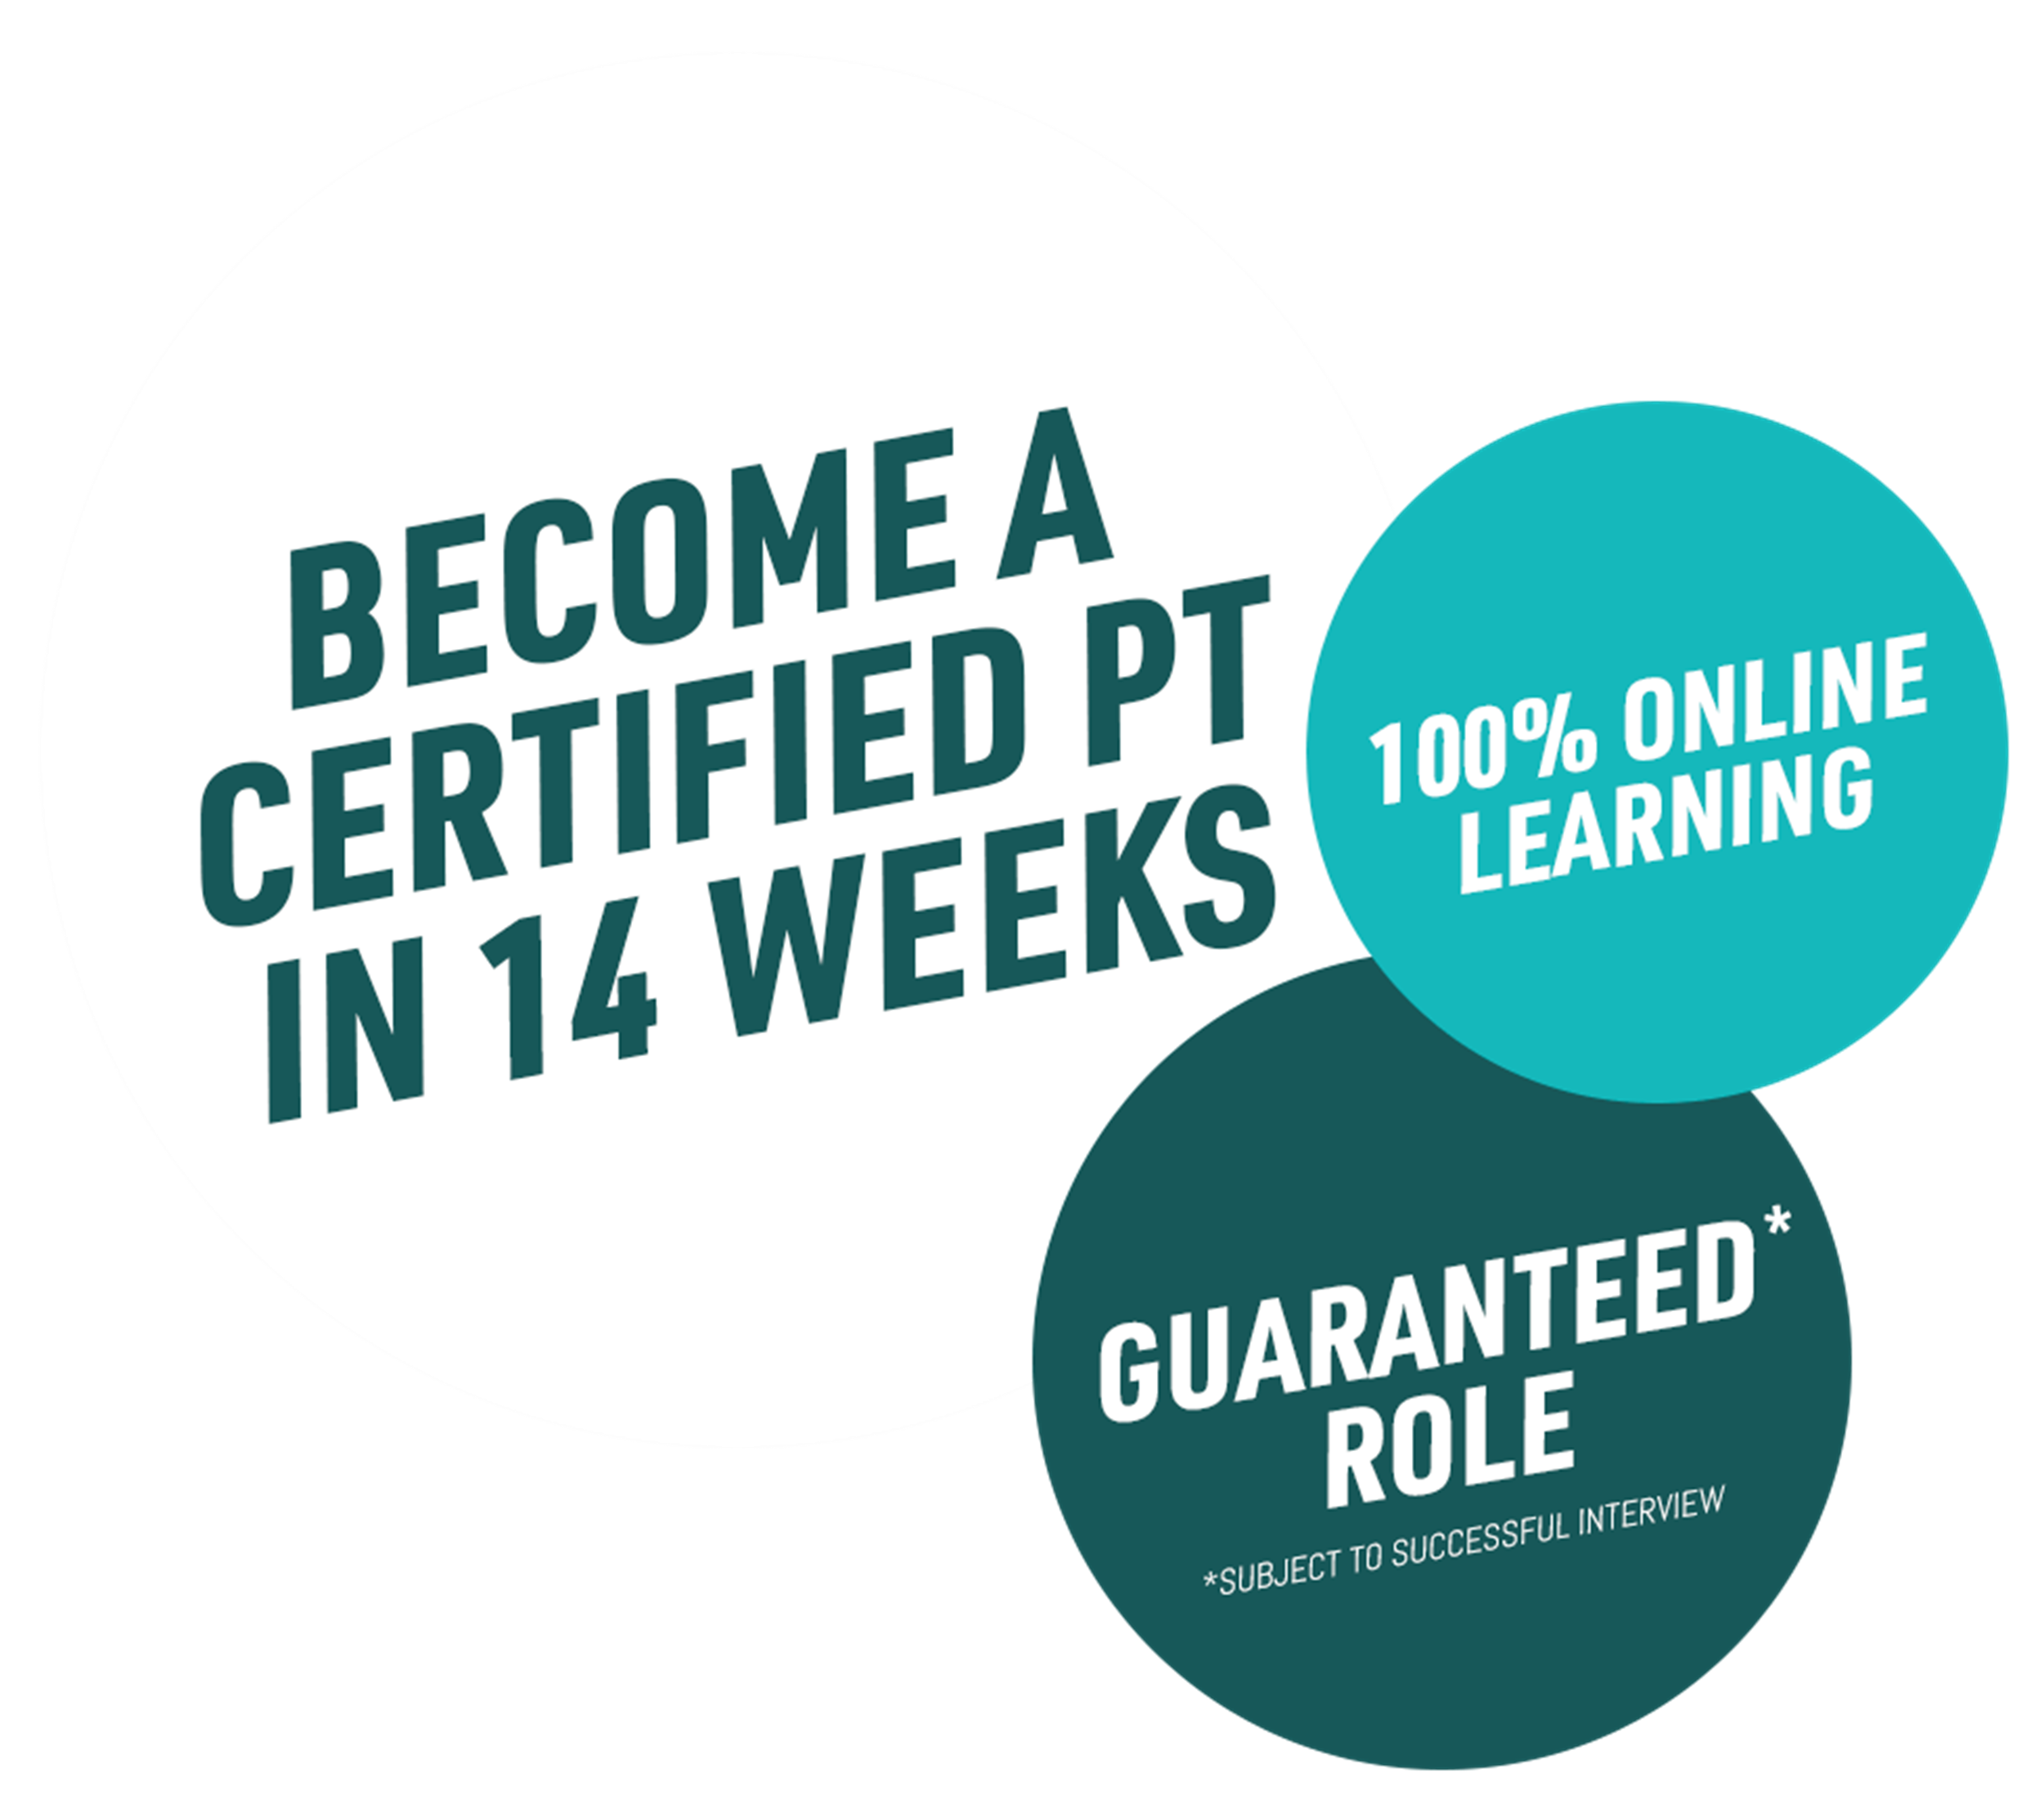 Become a certified PT in 14 weeks